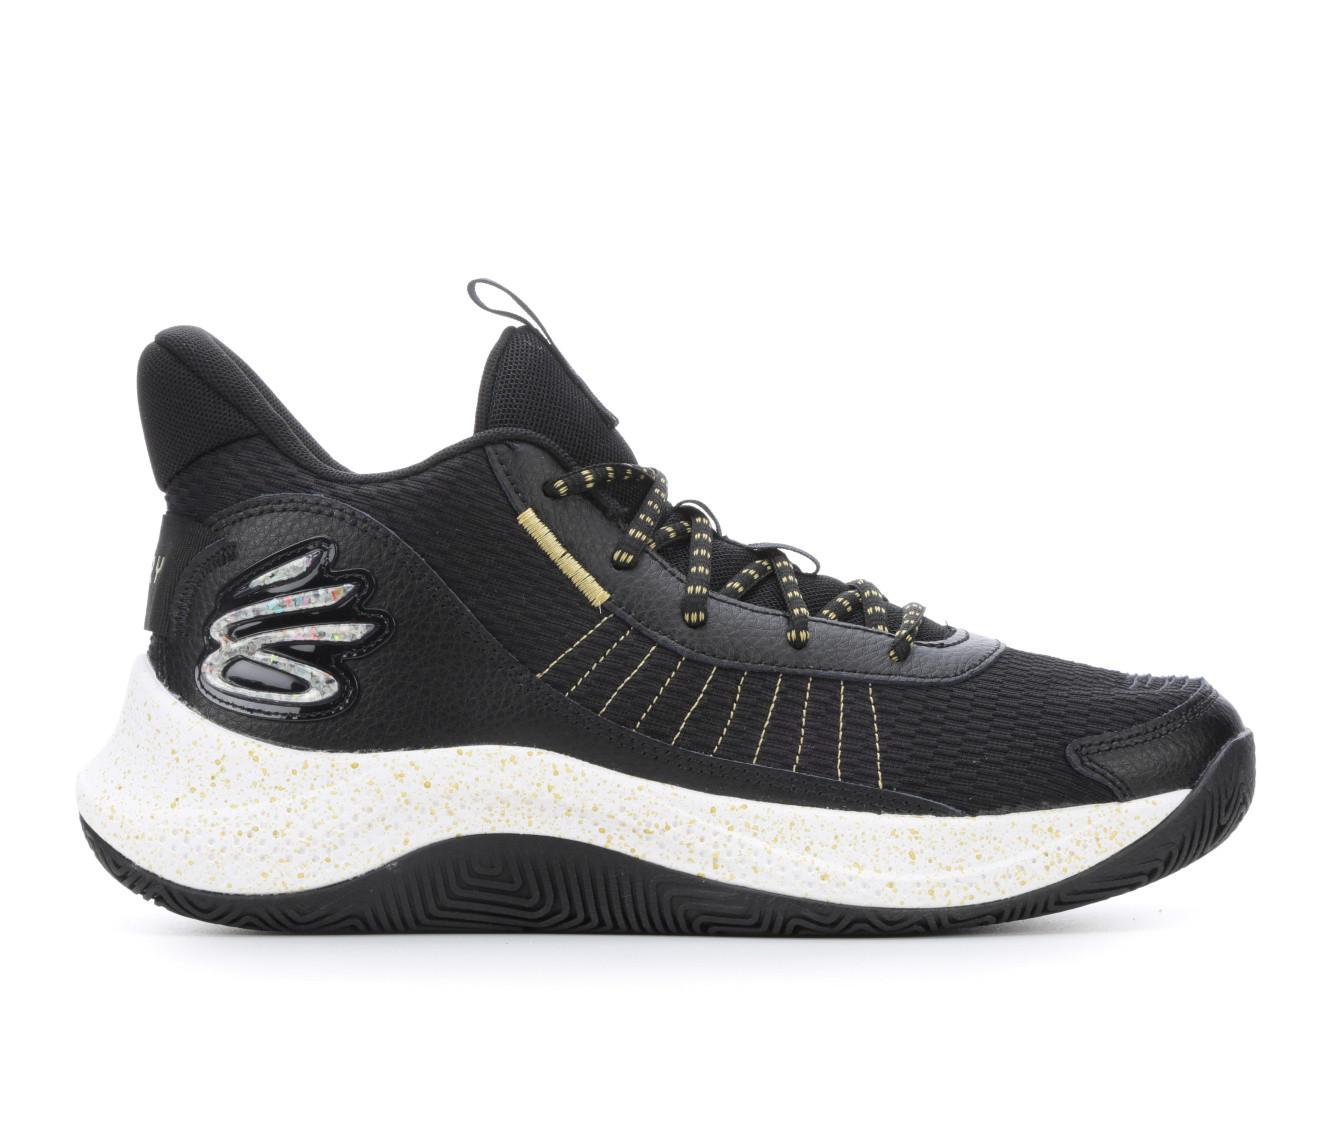 Men's Under Armour Curry 327 Basketball Shoes